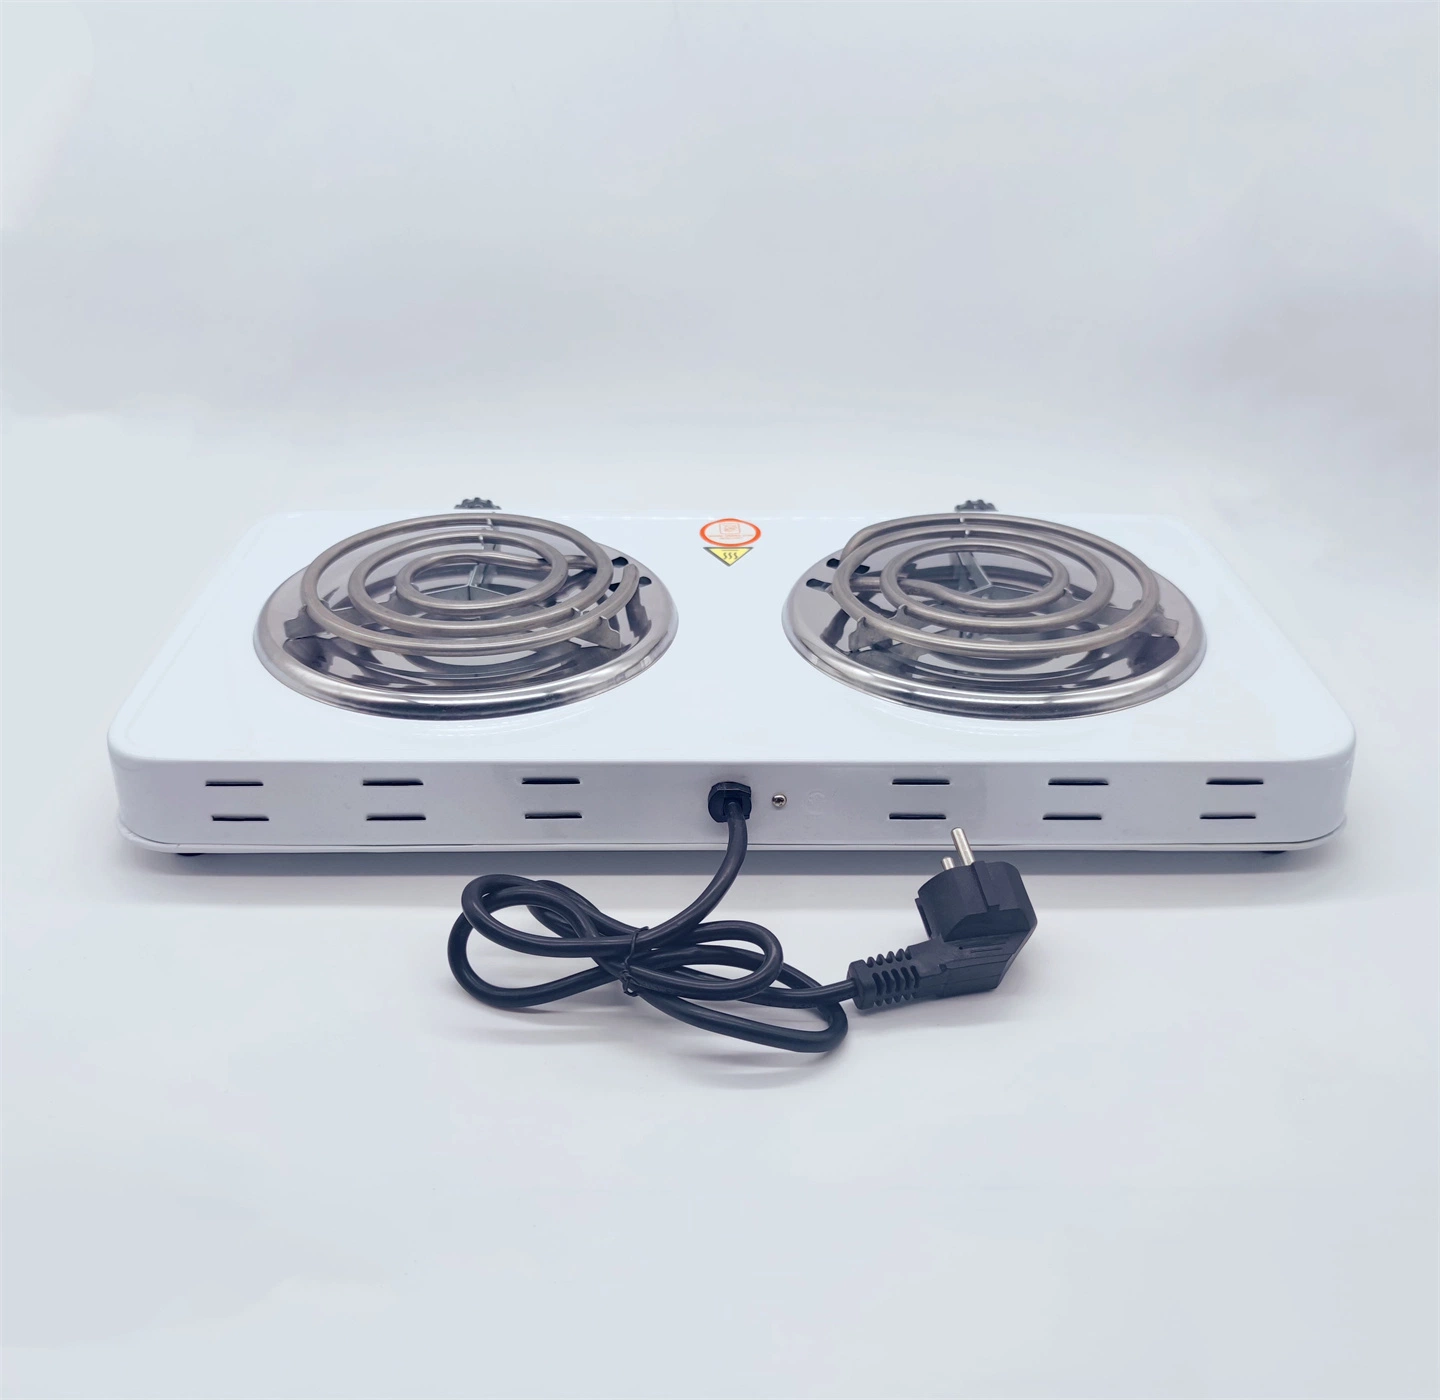 Cheap Price Stainless Steel Cast Iron Electric Heater Stove Hot Plate Cooker